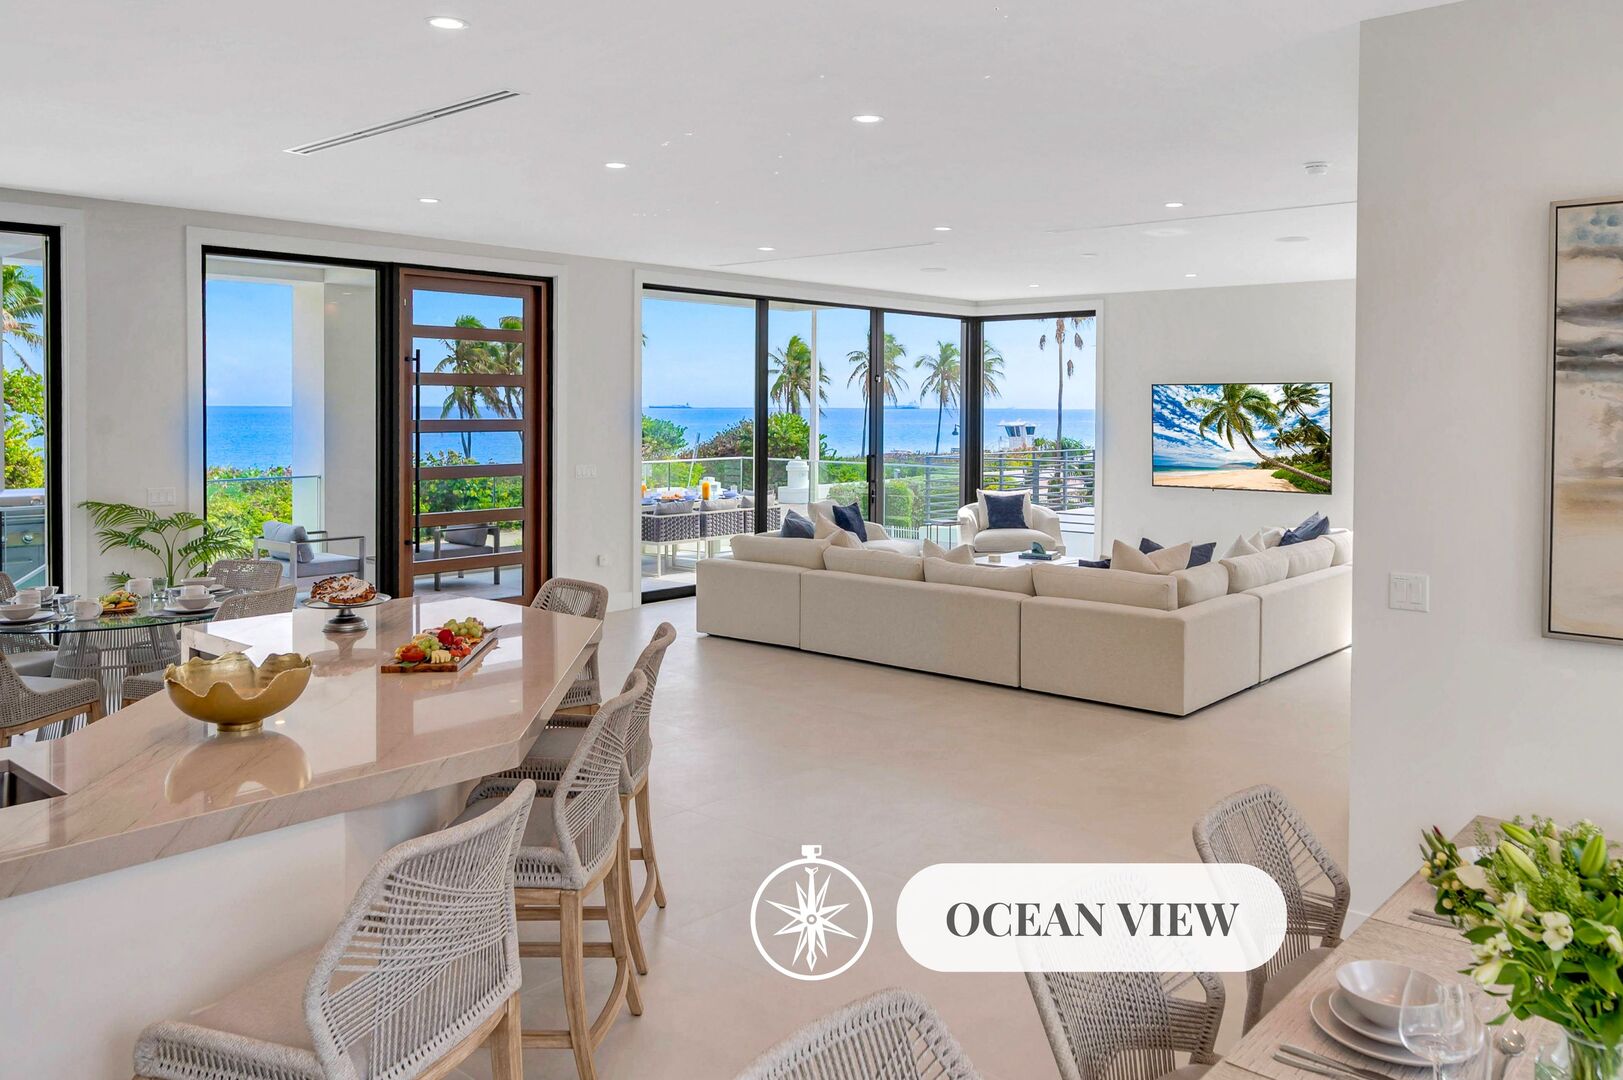 Beach and Ocean vacationing at its finest. Marvel in beach views and waterfront tranquility from the open plan expansive and serene living area and outdoor lounges.